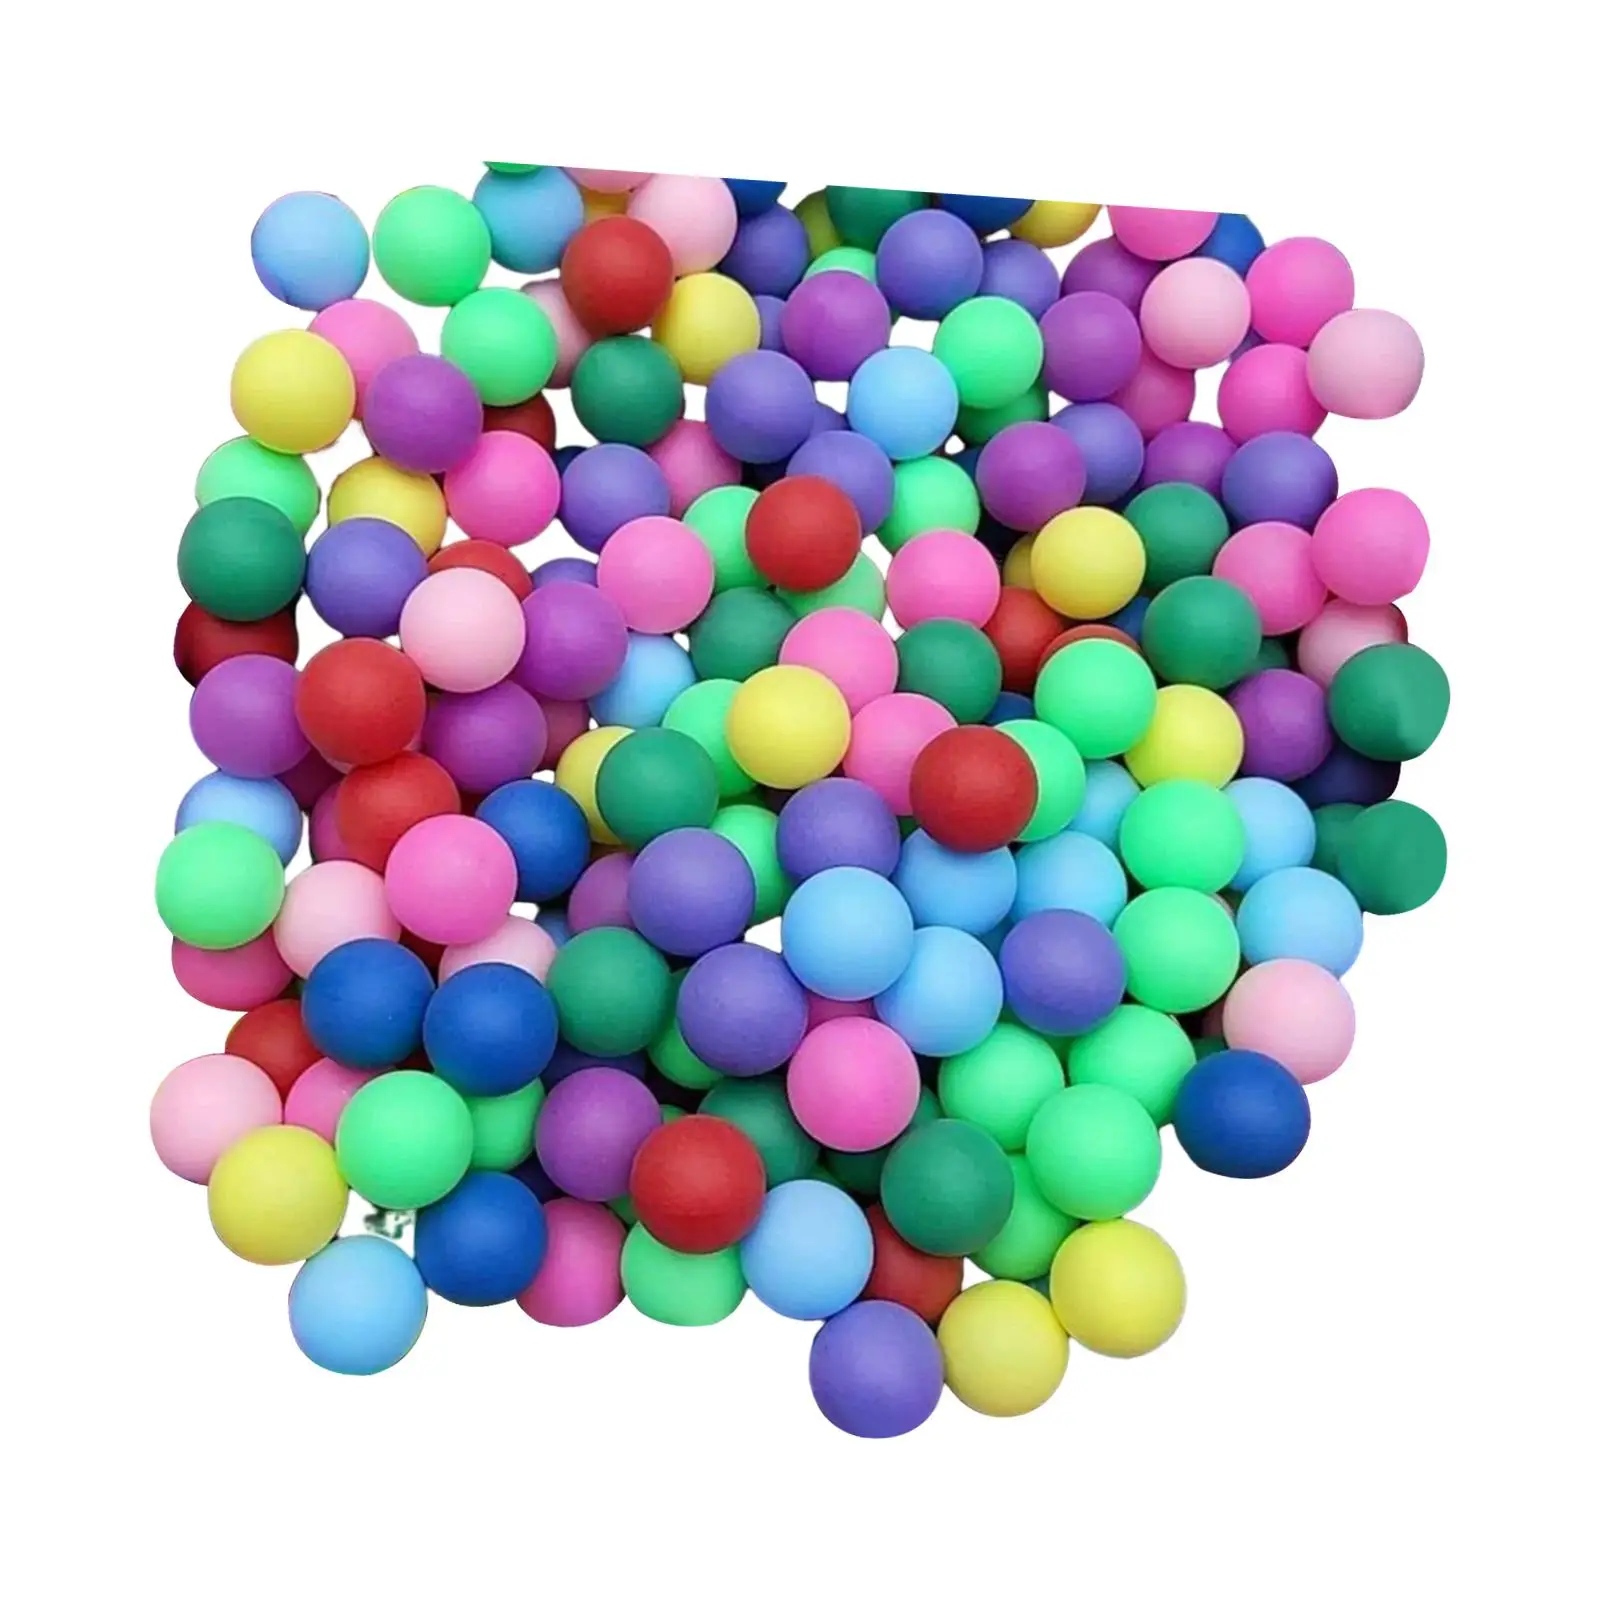 

150Pcs Ping Pong Balls 40mm Entertainment Table Tennis Balls for Indoor Outdoor Pool Games Pet Toys Party Decor Halloween